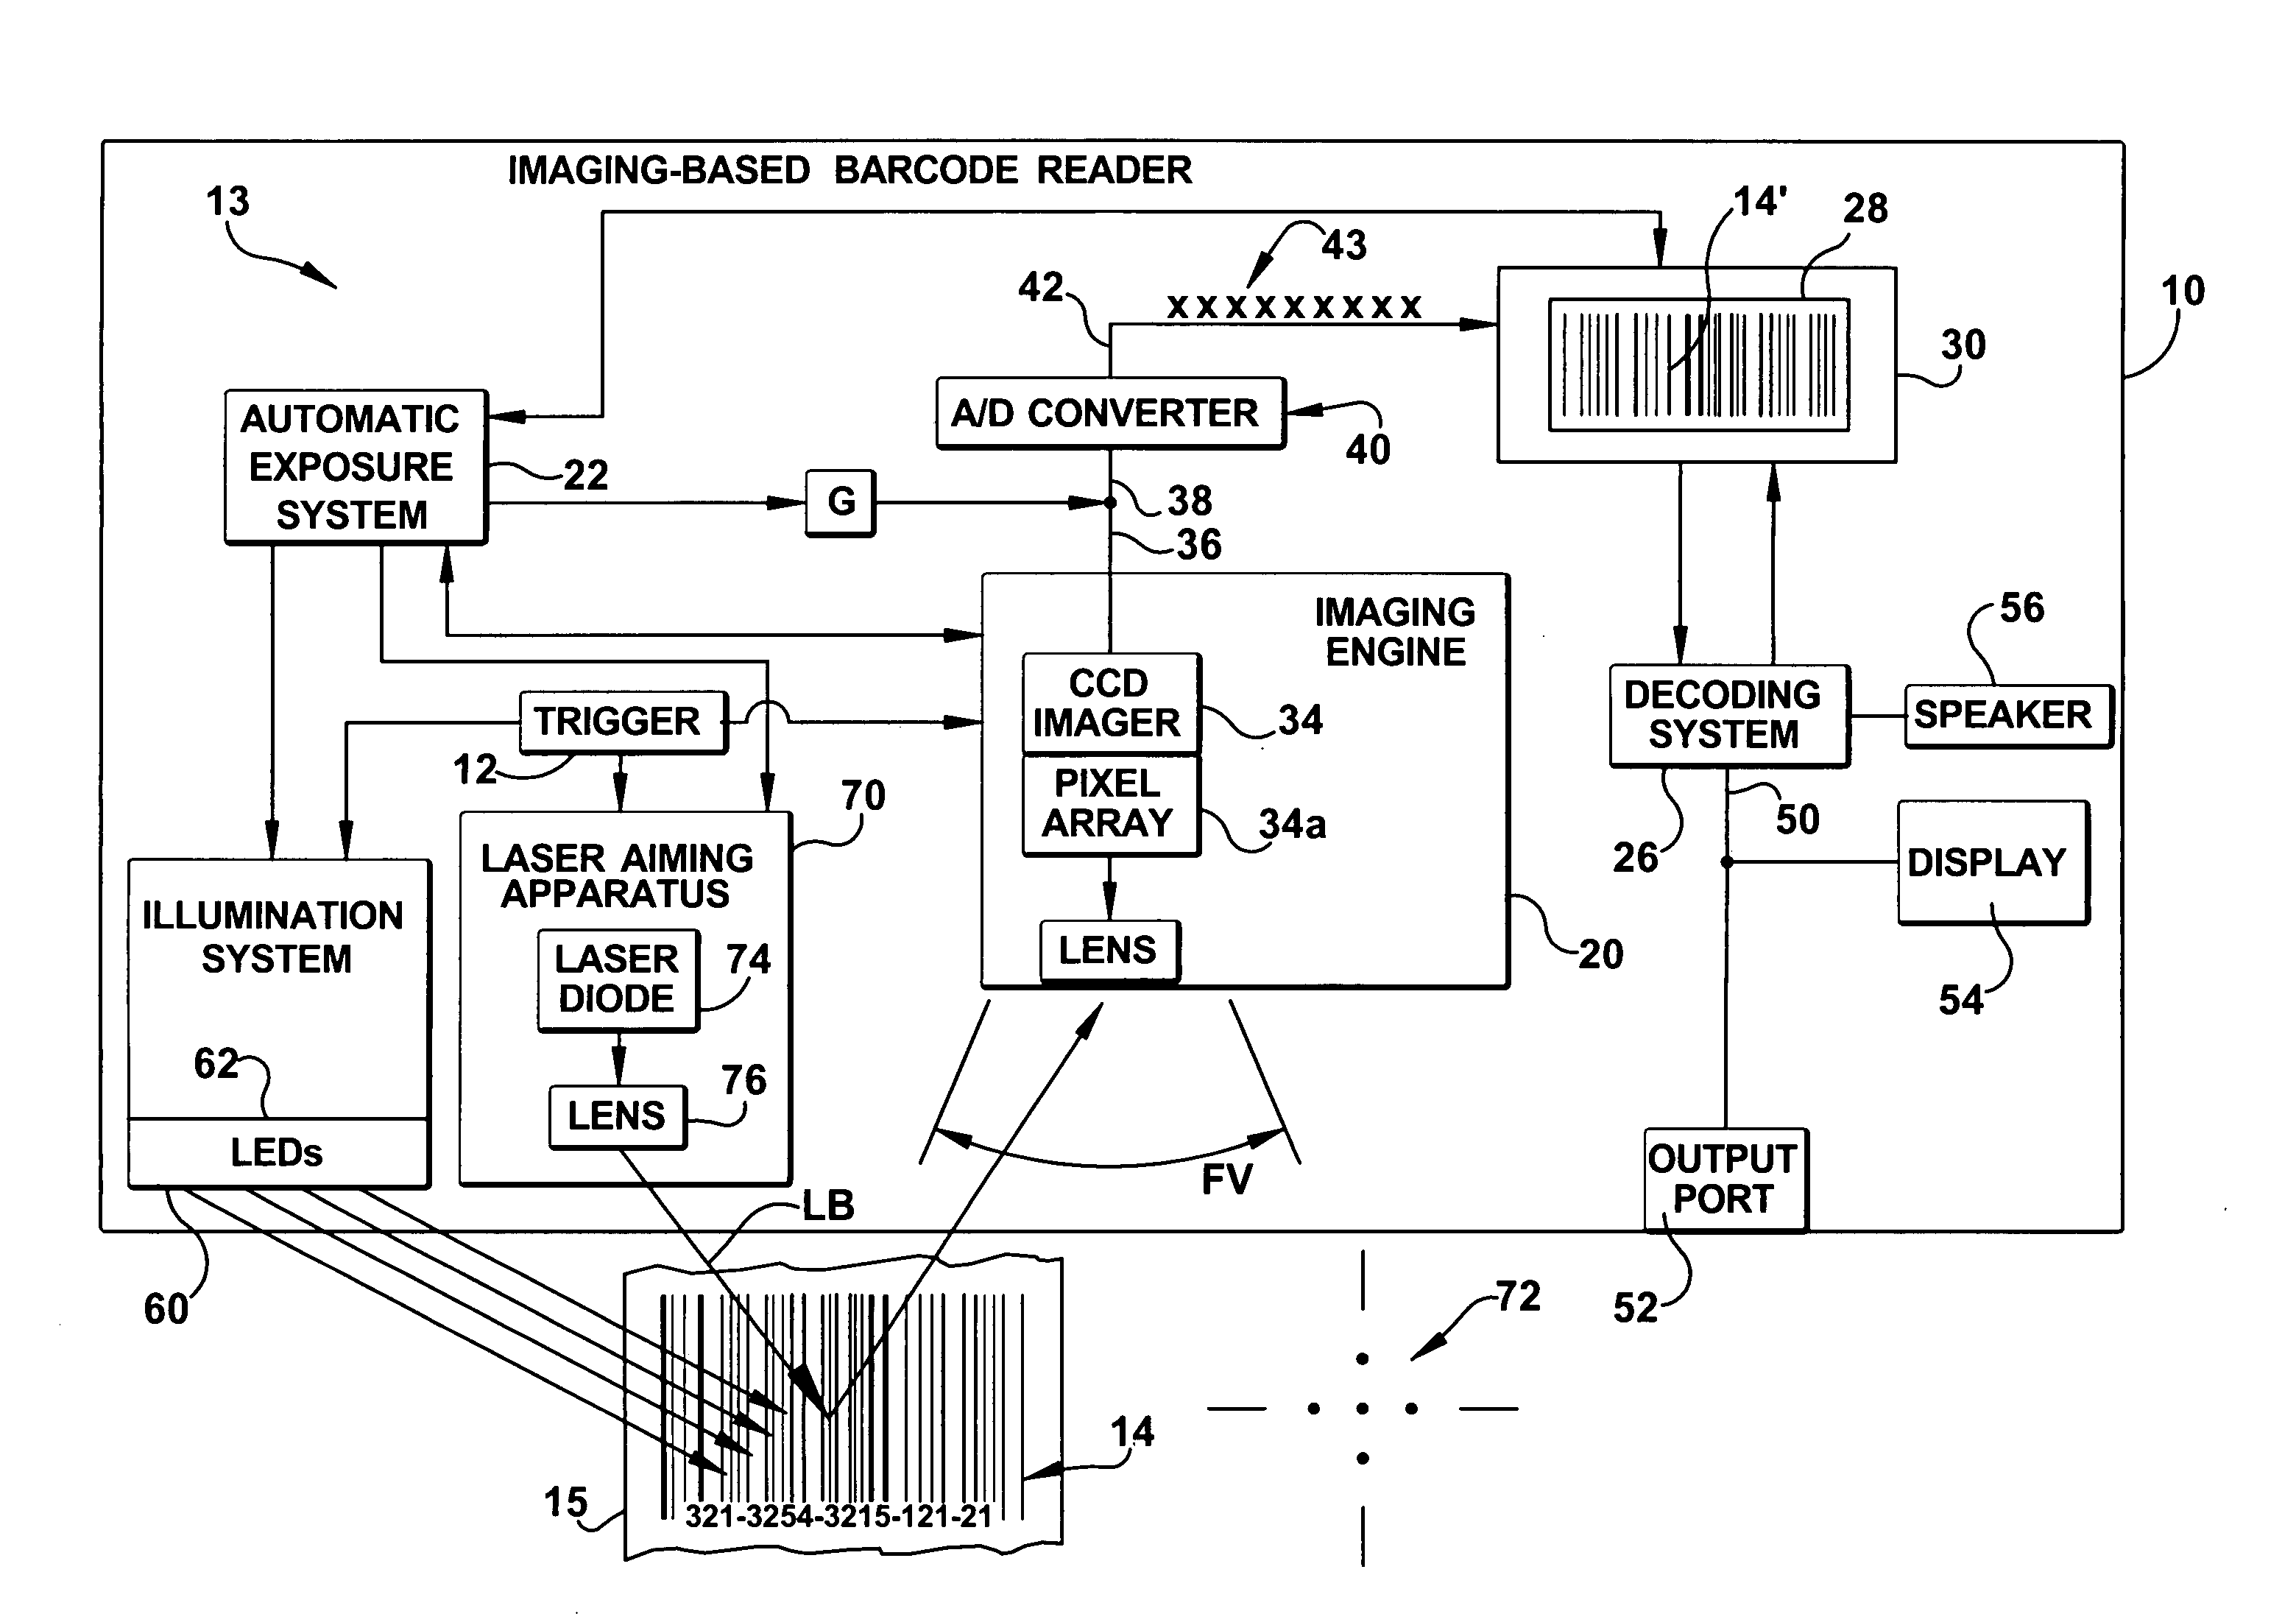 Automatic exposure system for imaging-based bar code reader